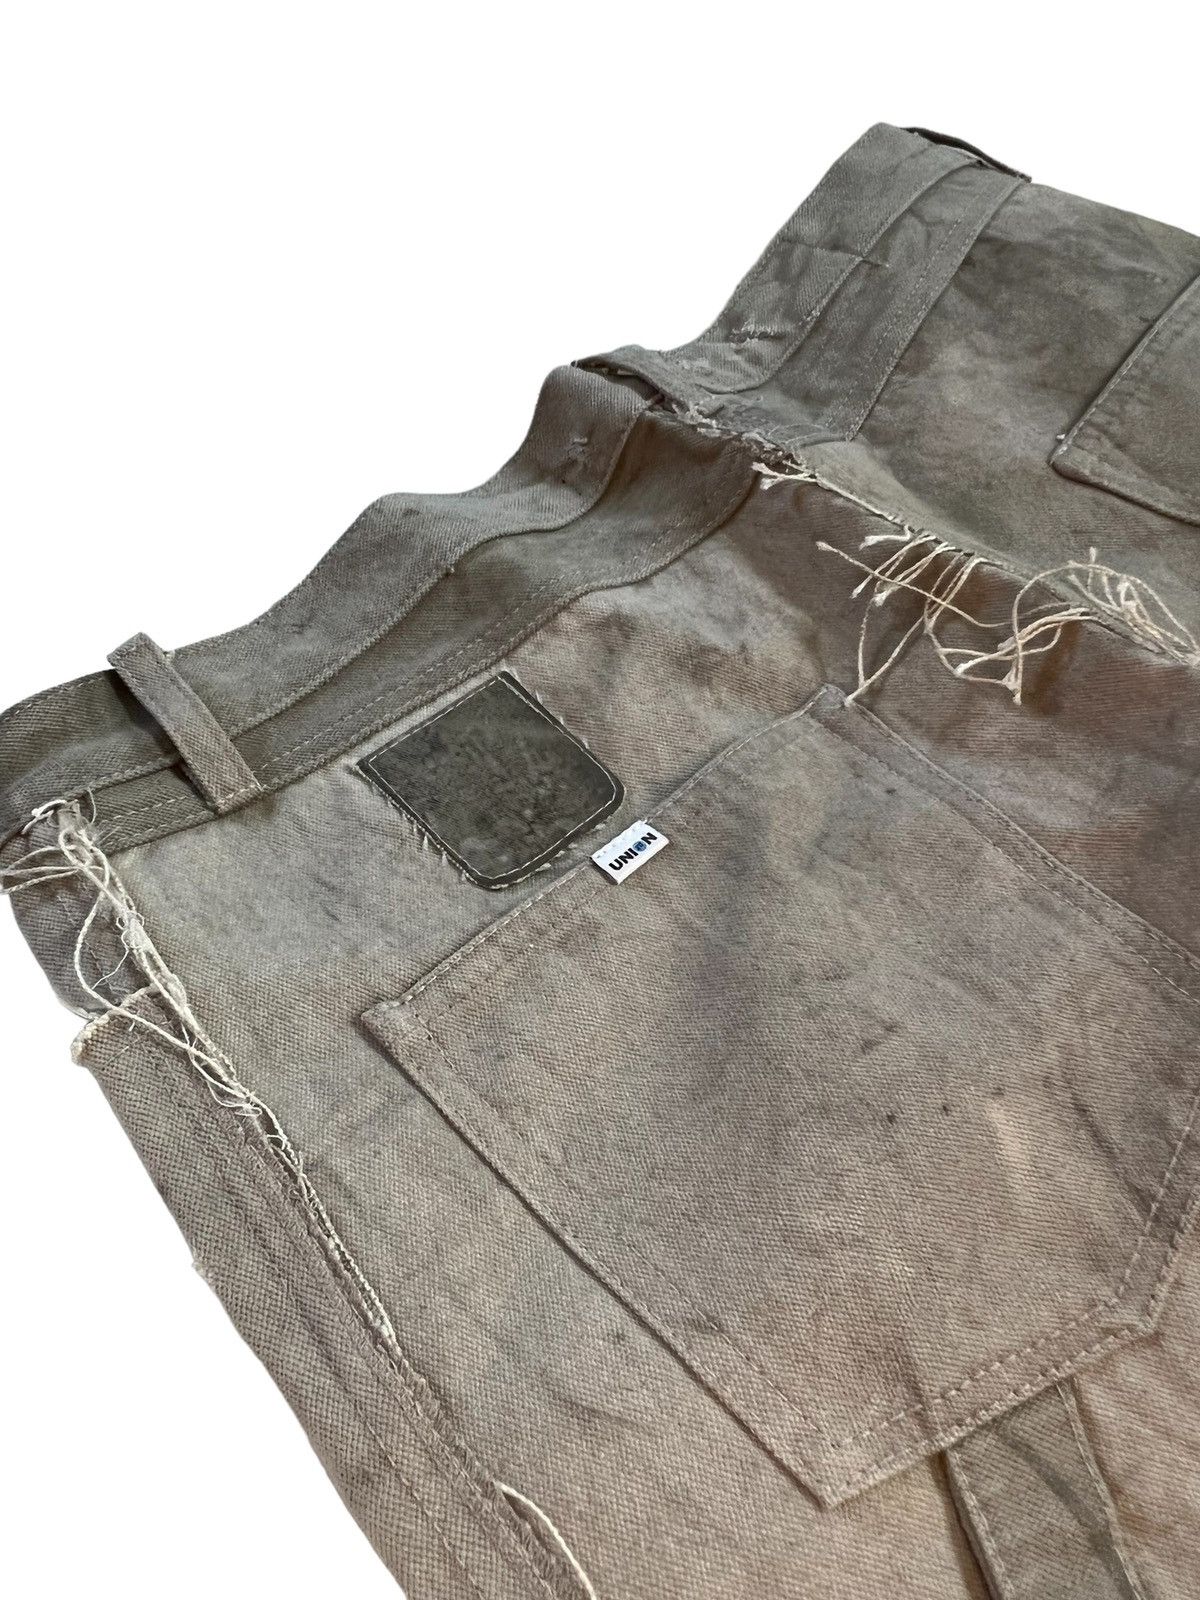 RRR-123 x Union Upcycled Mailbag Carpenter Pants | Grailed